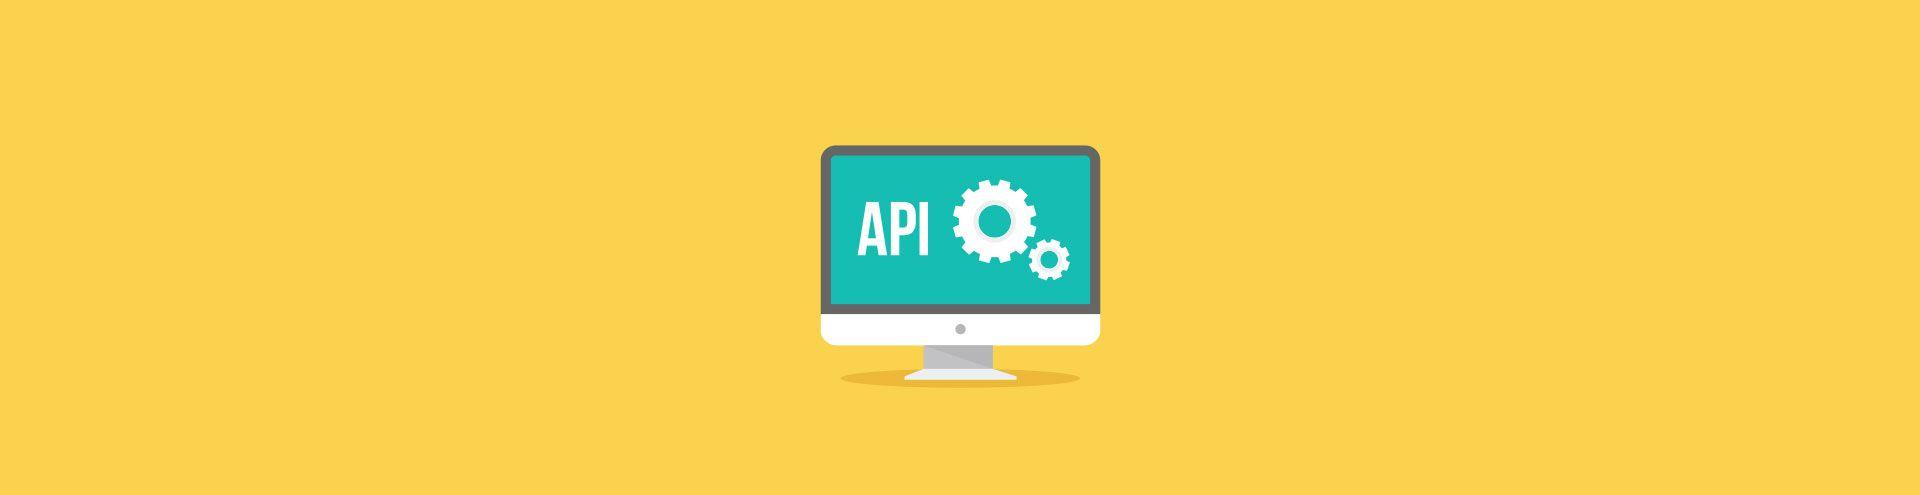 Express js API and REST API Organization: tips, examples and techniques